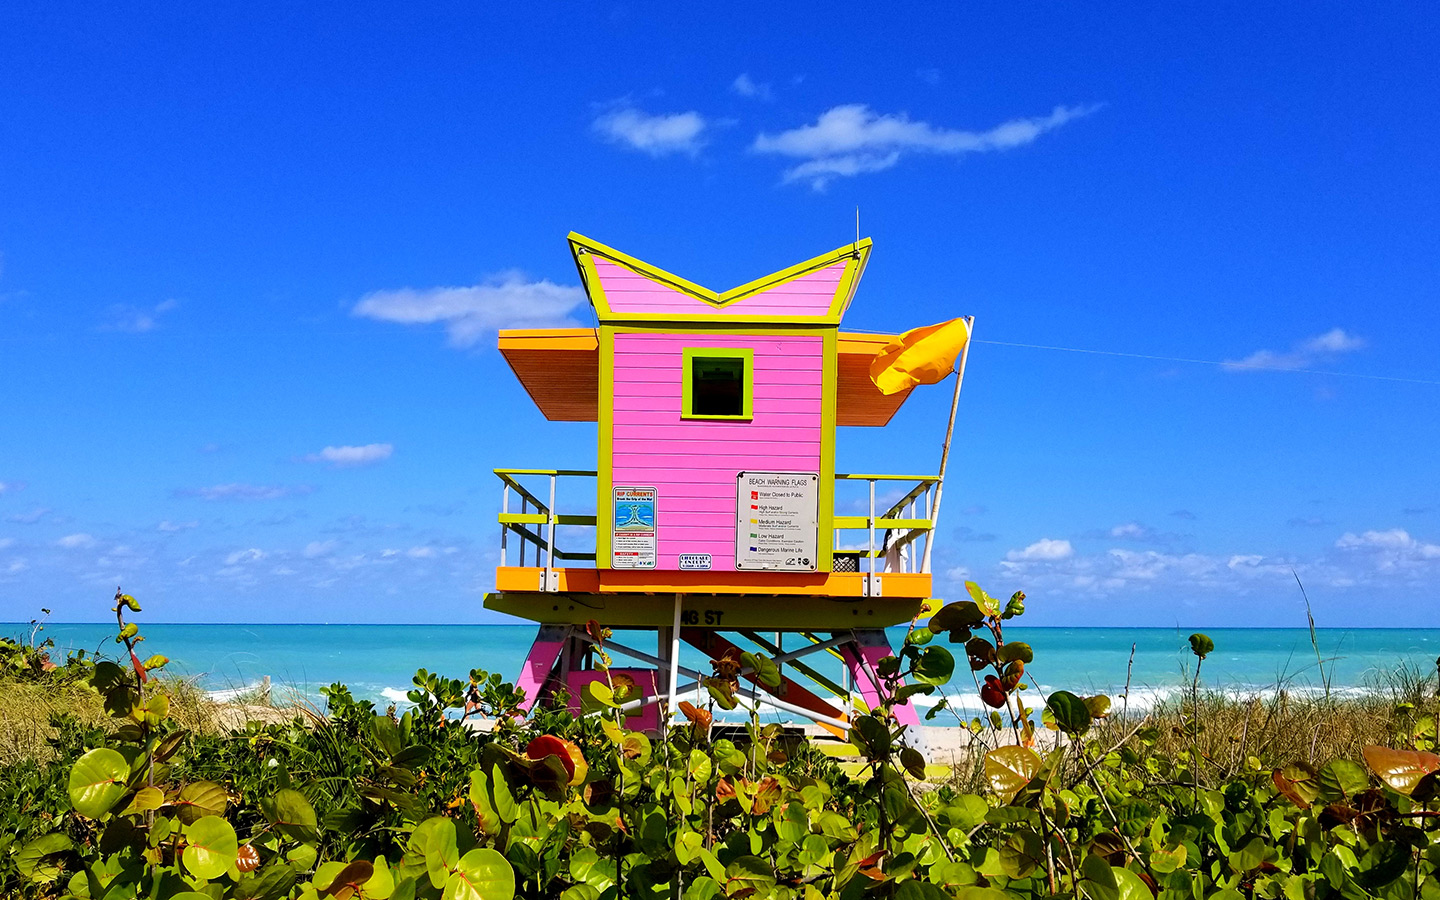 View of pink lifeguard stand on Miami Beach